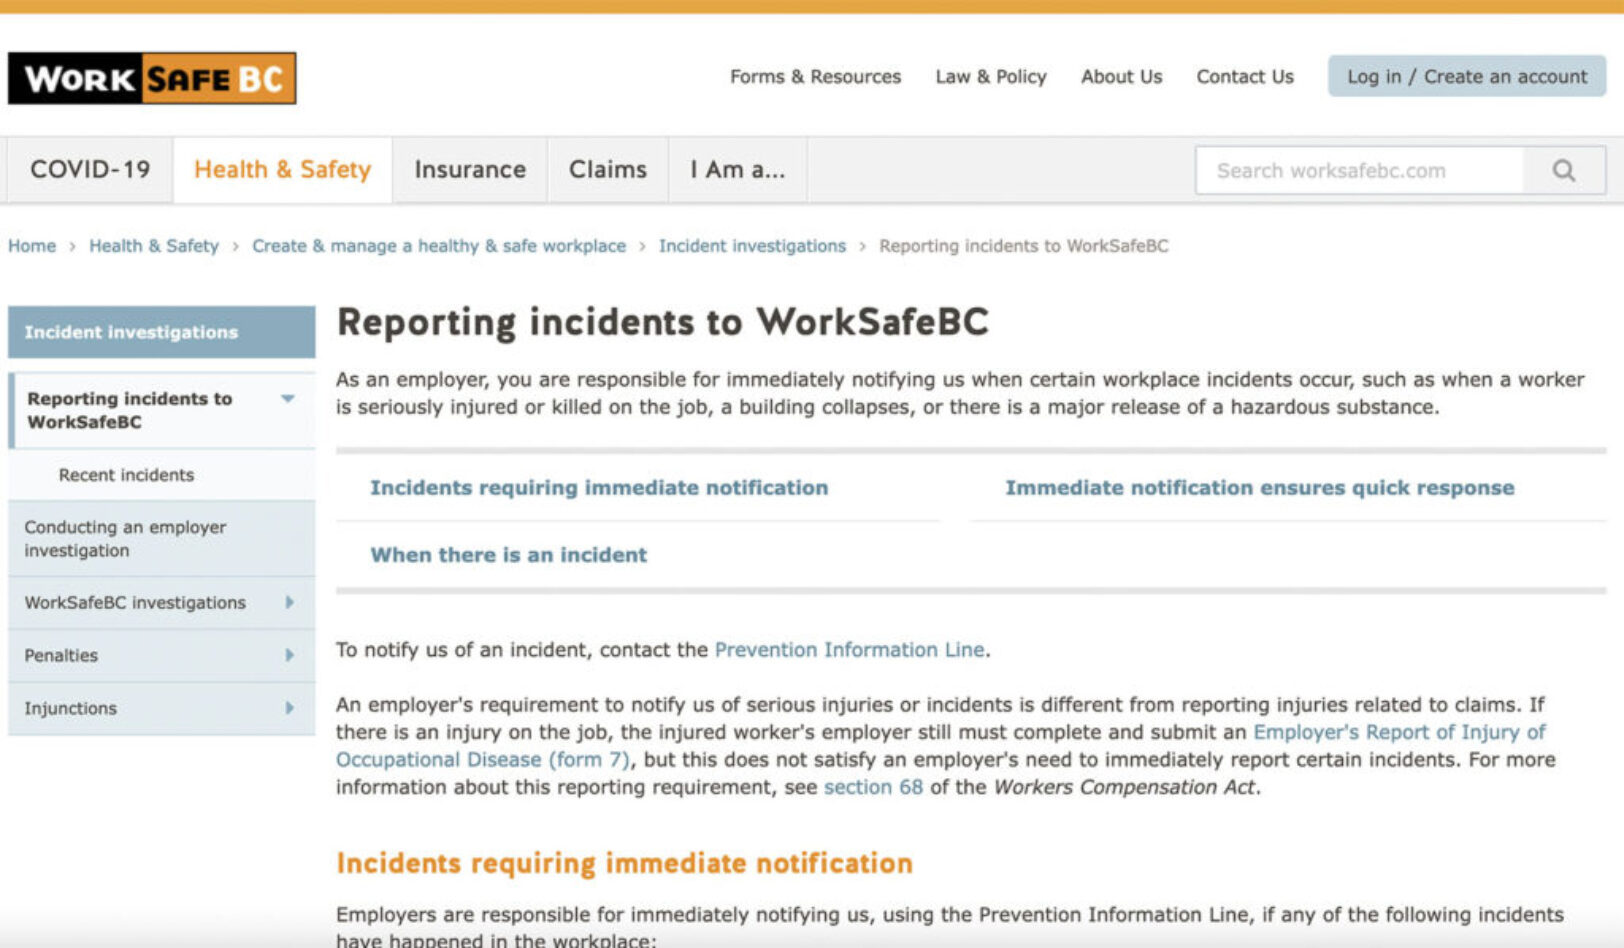 Reporting Incidents to WorkSafeBC